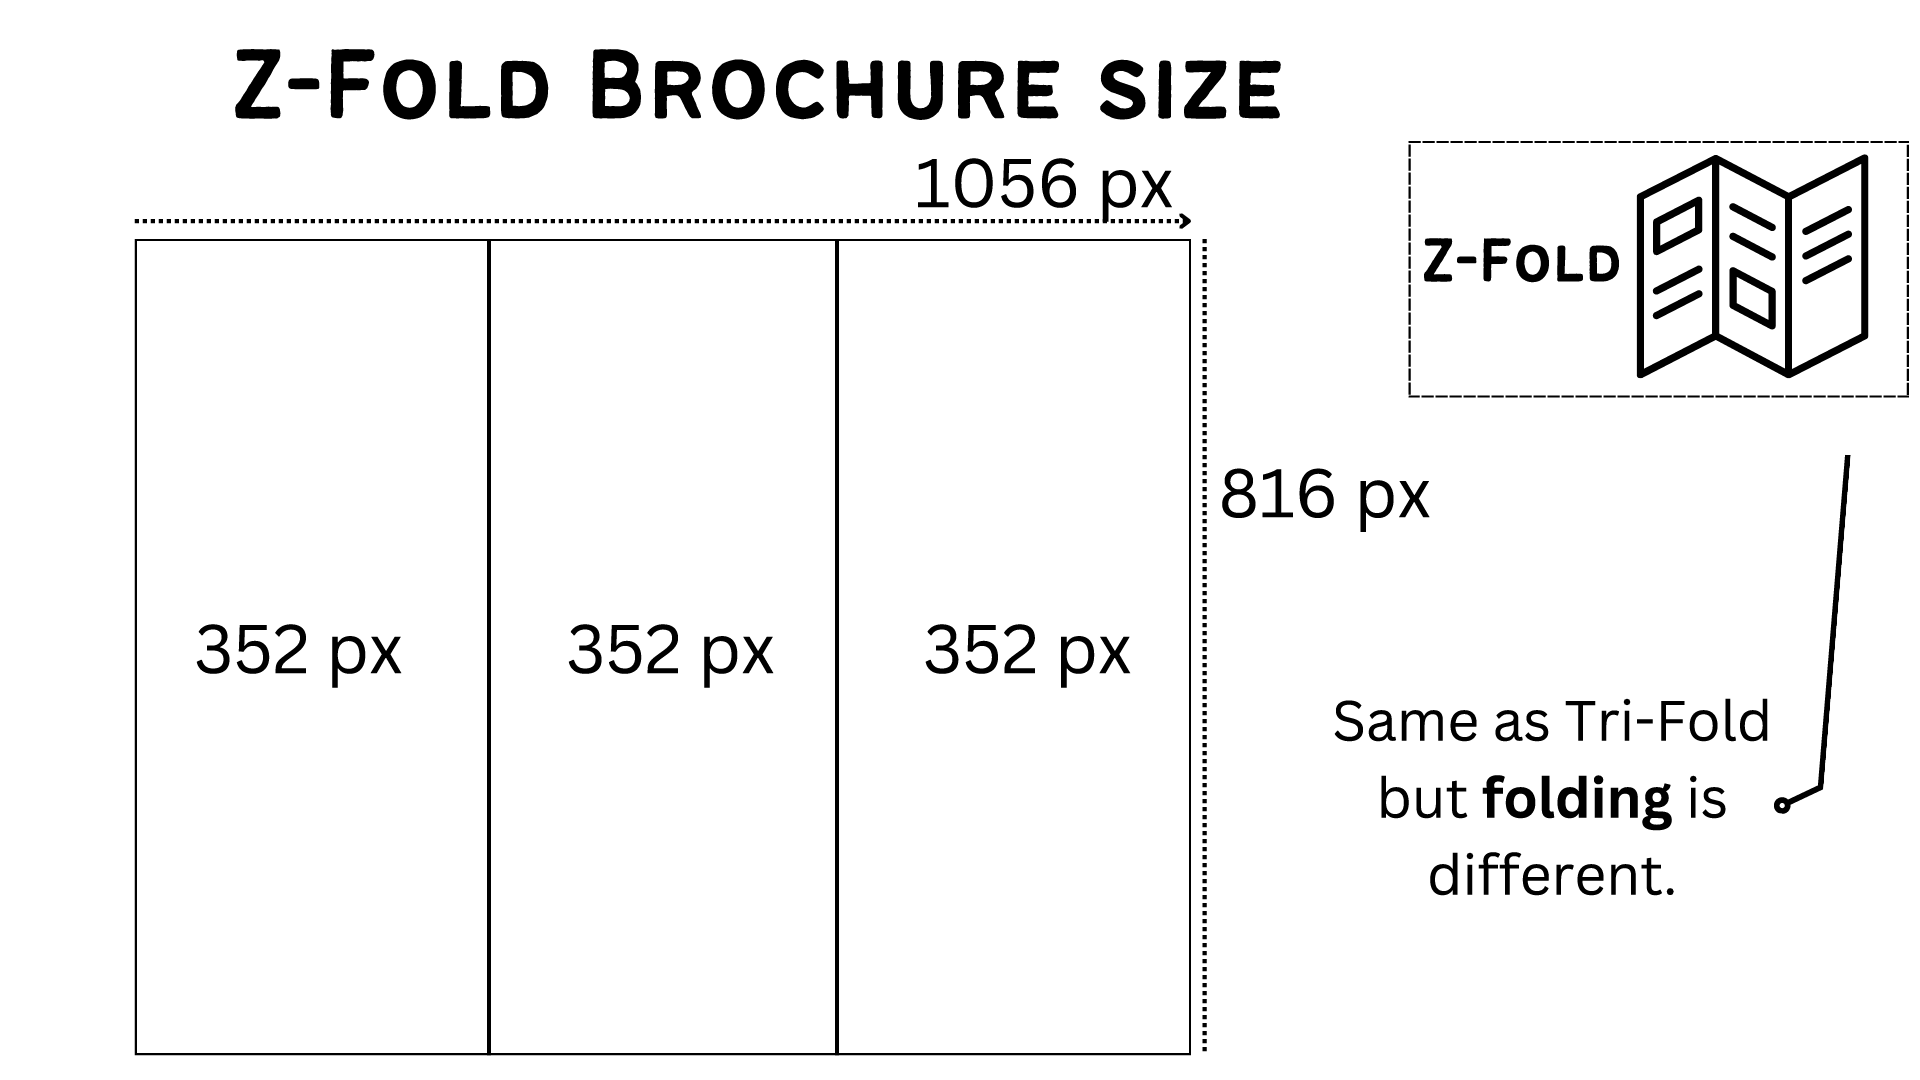 Z-Fold Brochure size and dimensions